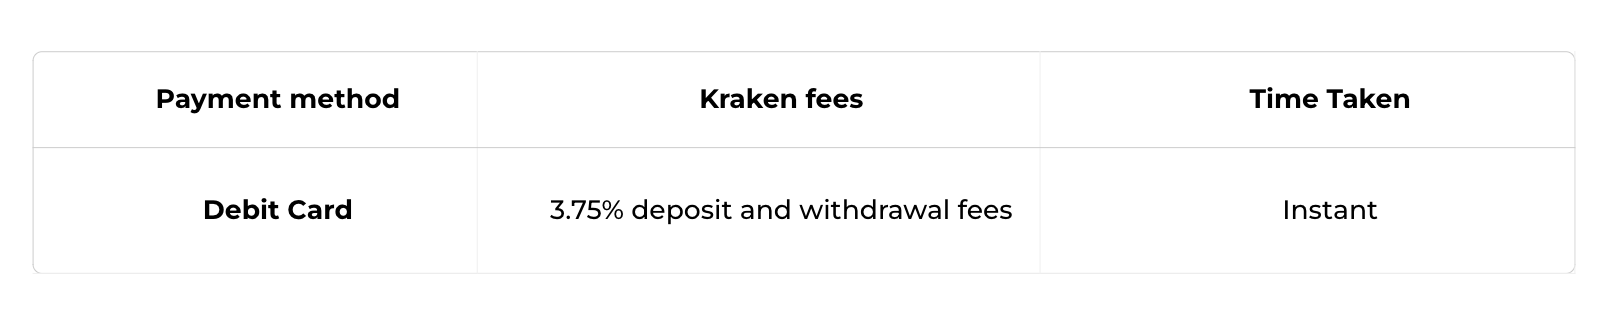 Crypto withdrawal | Withdraw to Bitcoin | Skrill